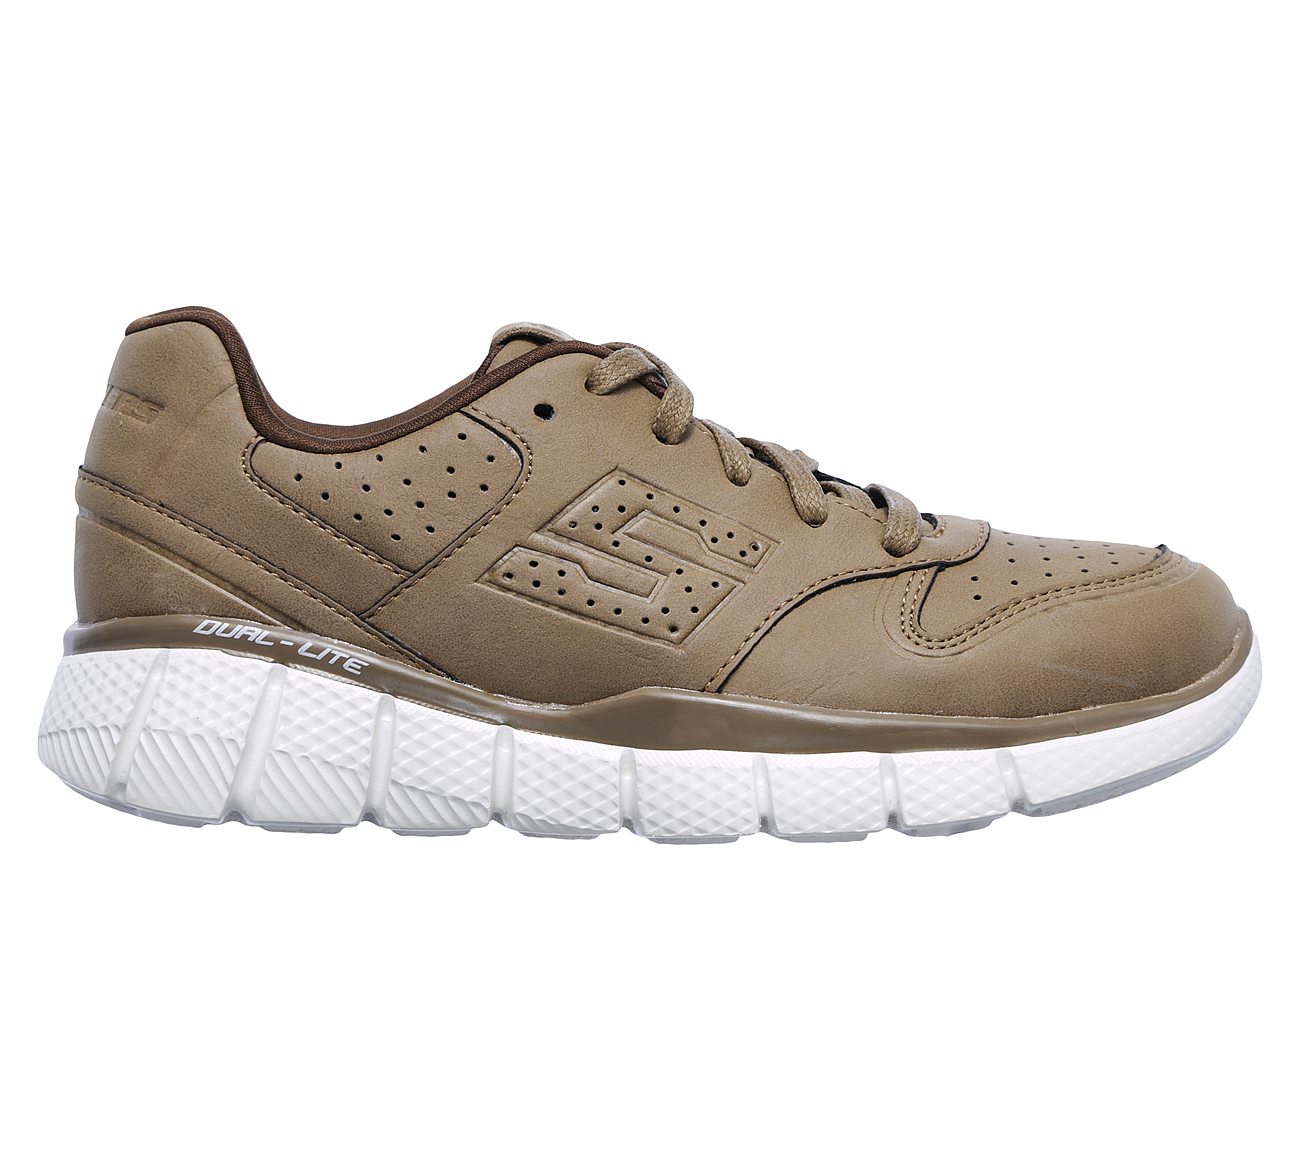 Buy SKECHERS Equalizer 2.0 - Schematics Sport Shoes only $47.00